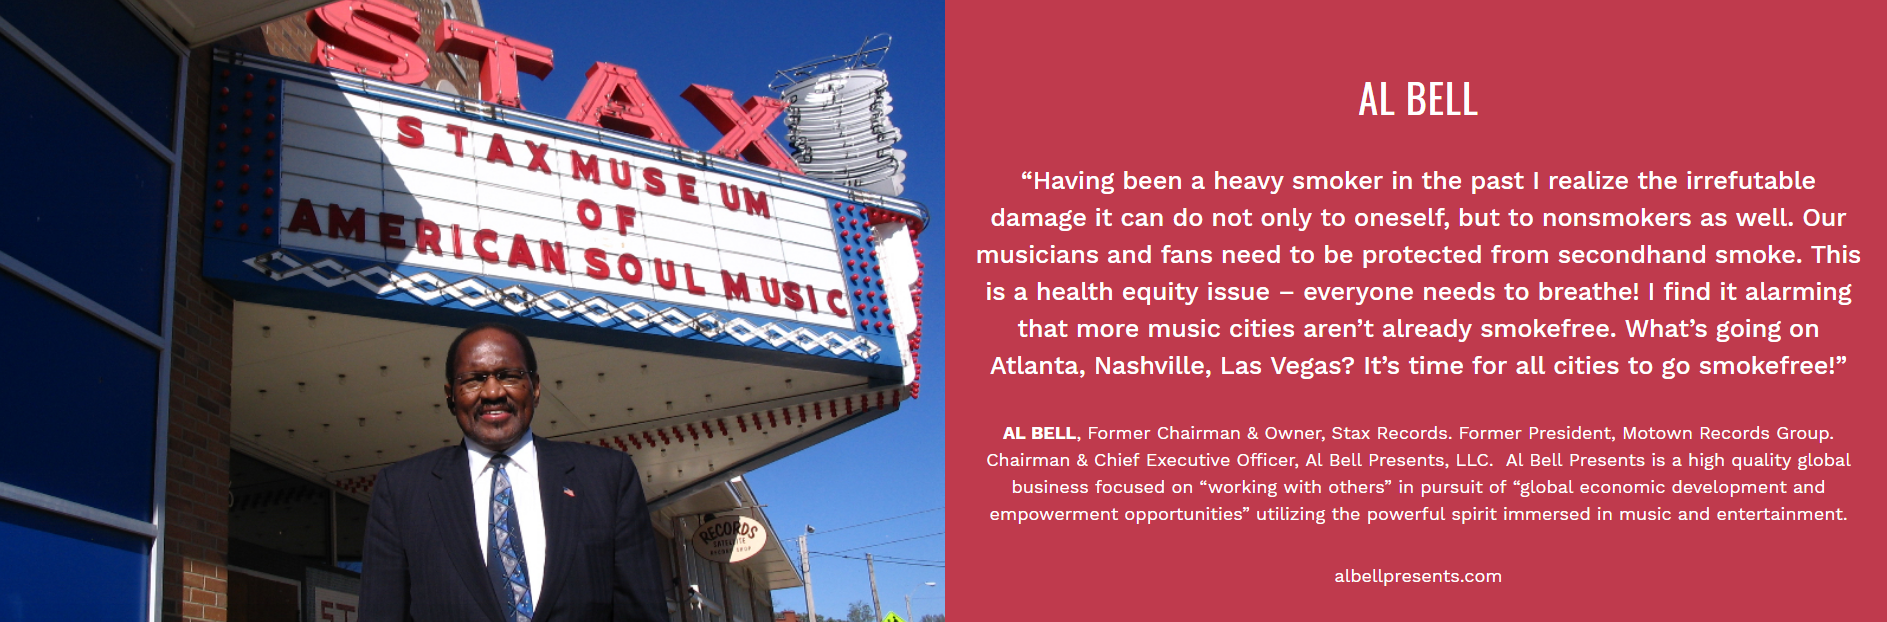 Al Bell of Stax Supports Smokefree Music Cities